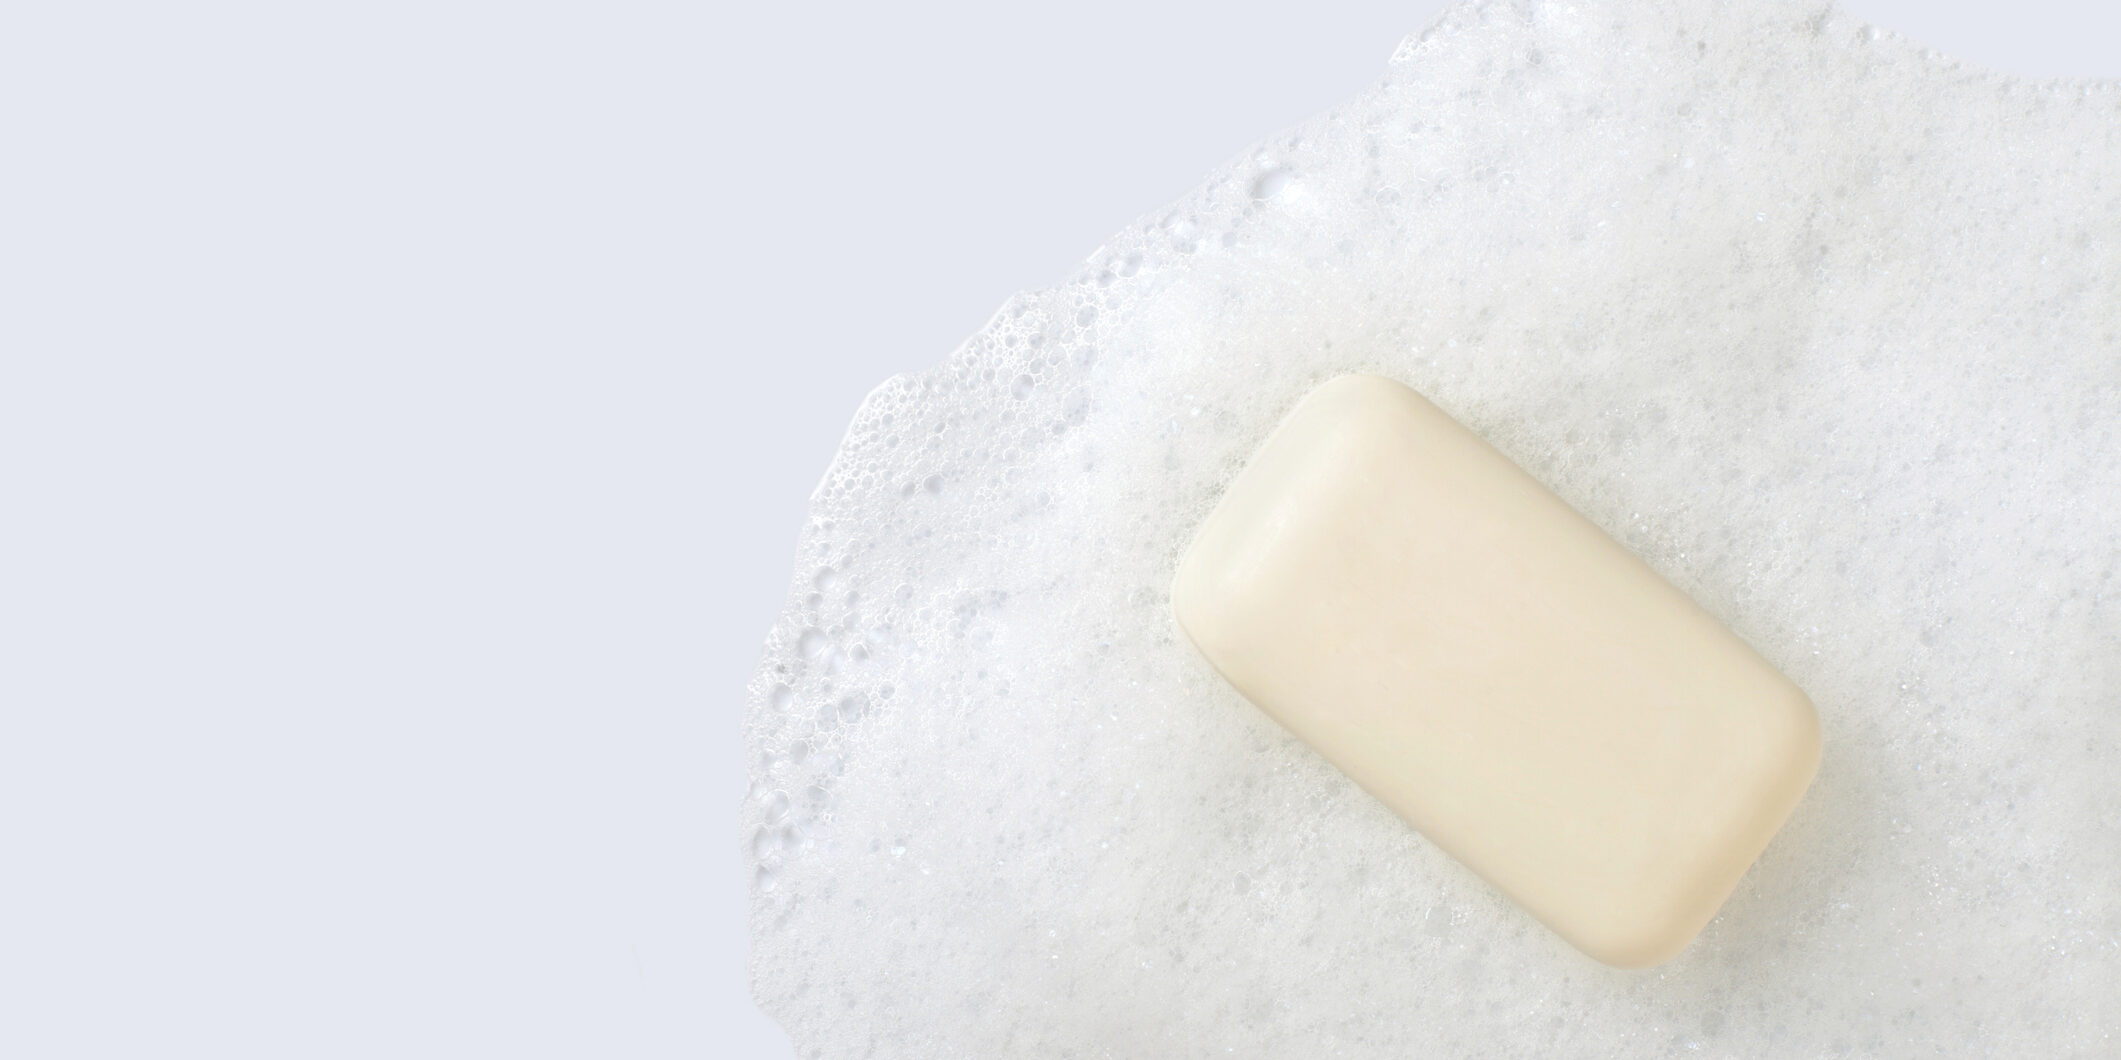 A cream colored bar of soap with soap suds on a white background